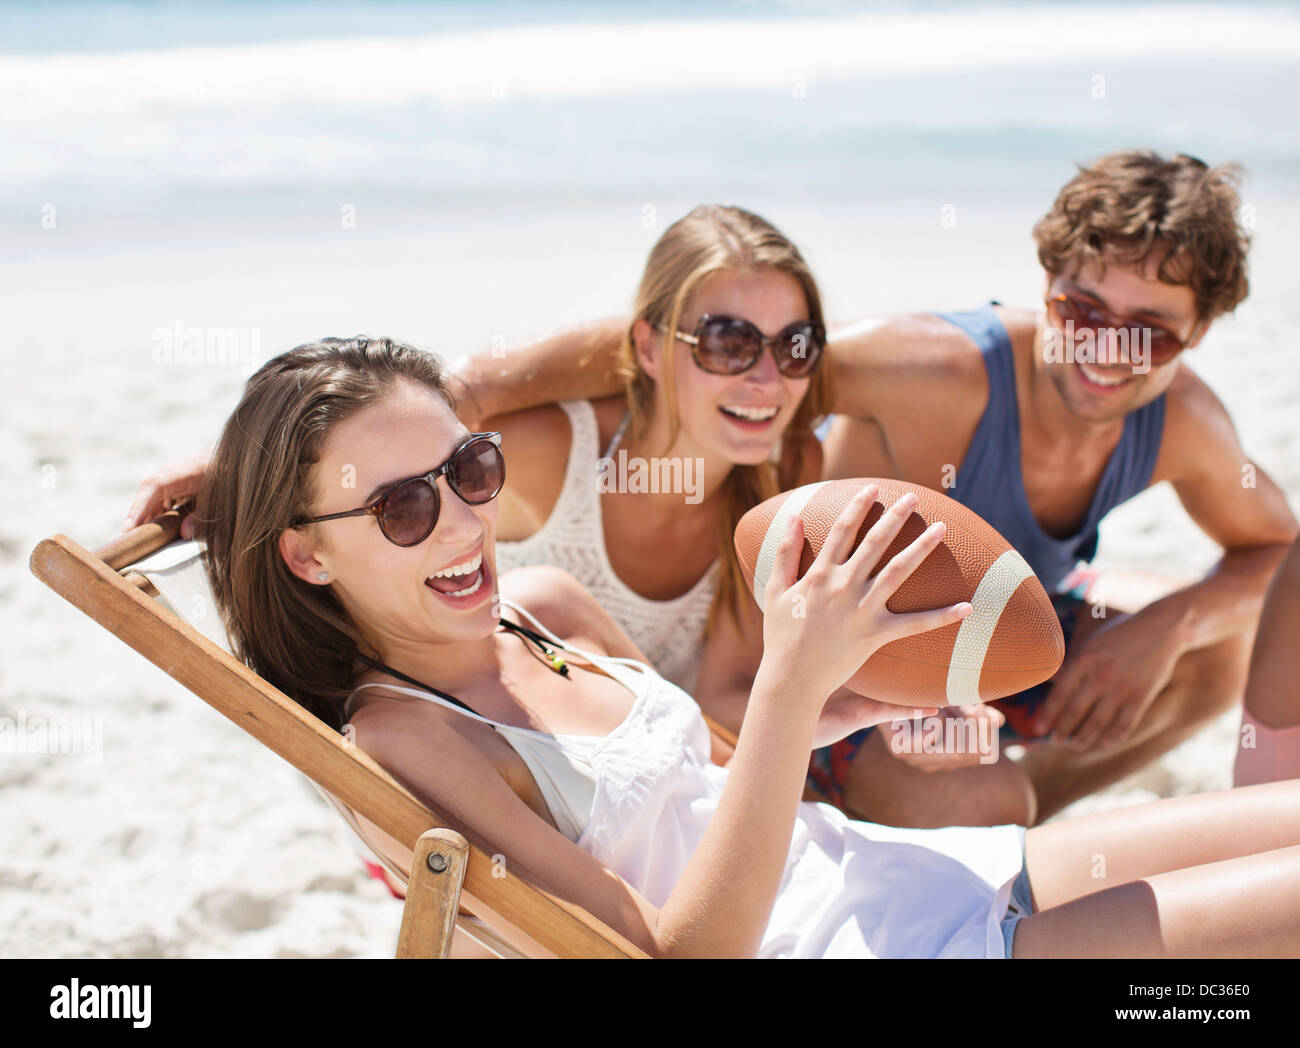 Smiling friends with football on beach Banque D'Images